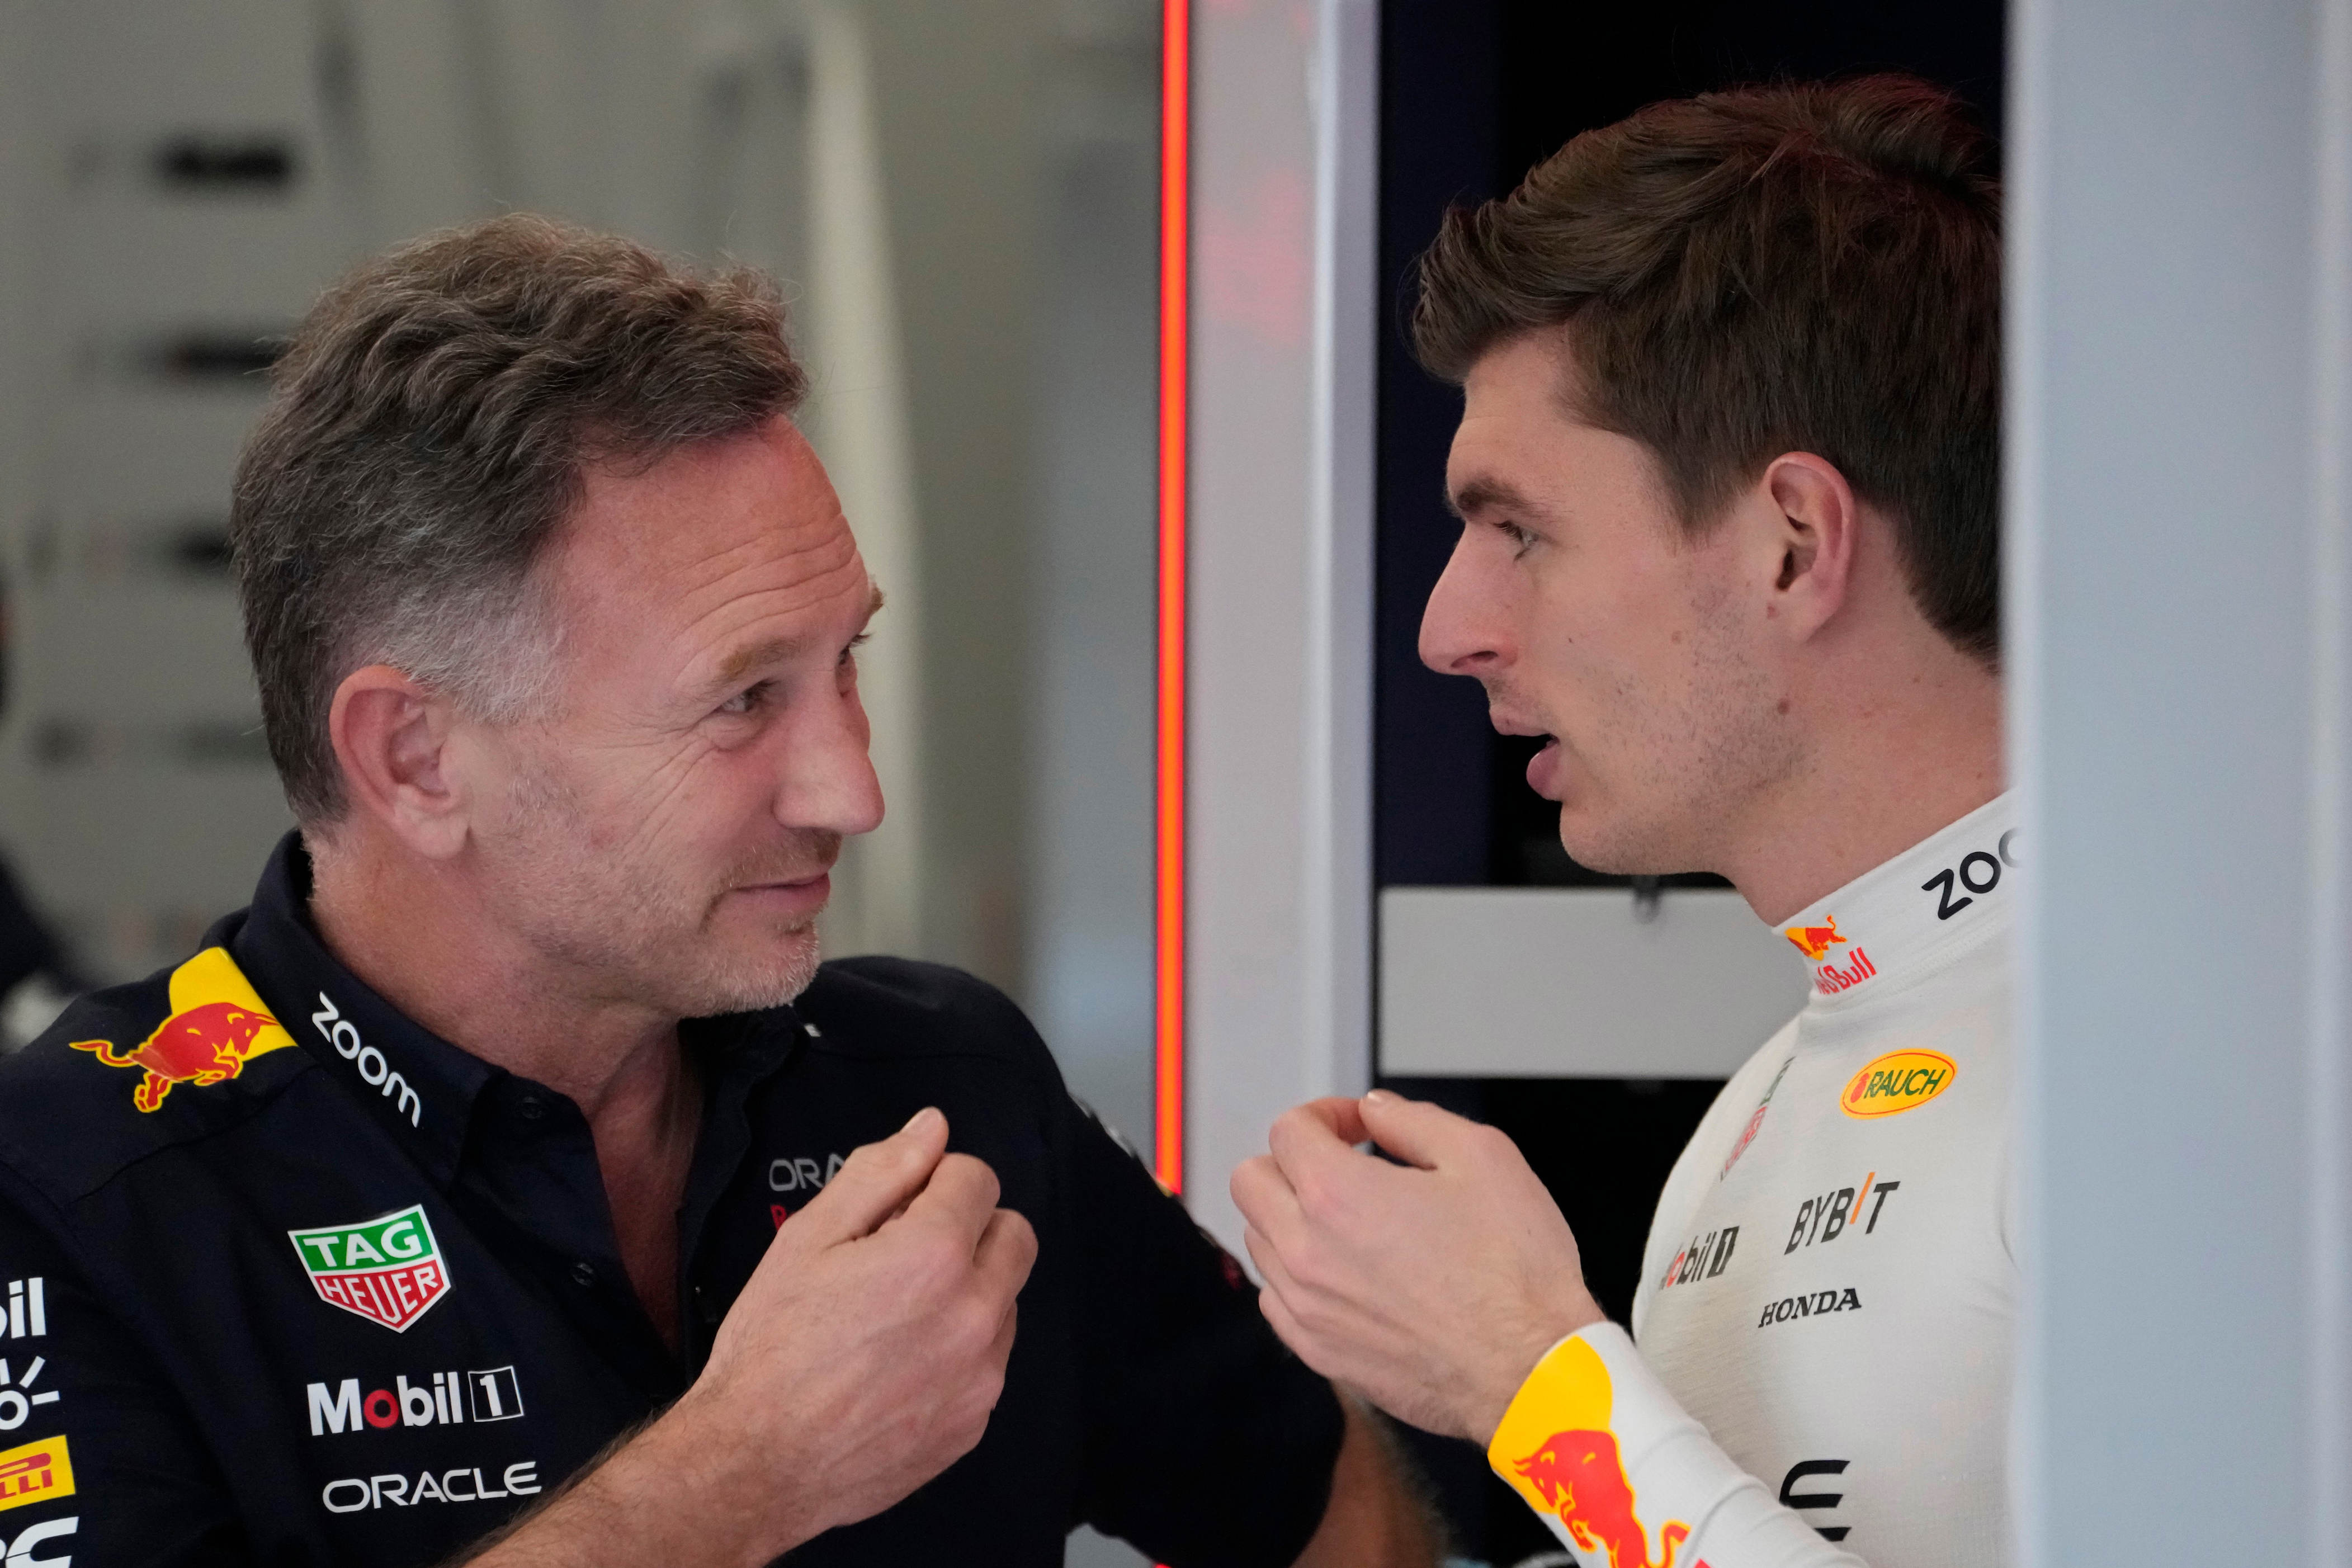 christian horner – latest: female accuser makes complaint to fia after red bull appeal